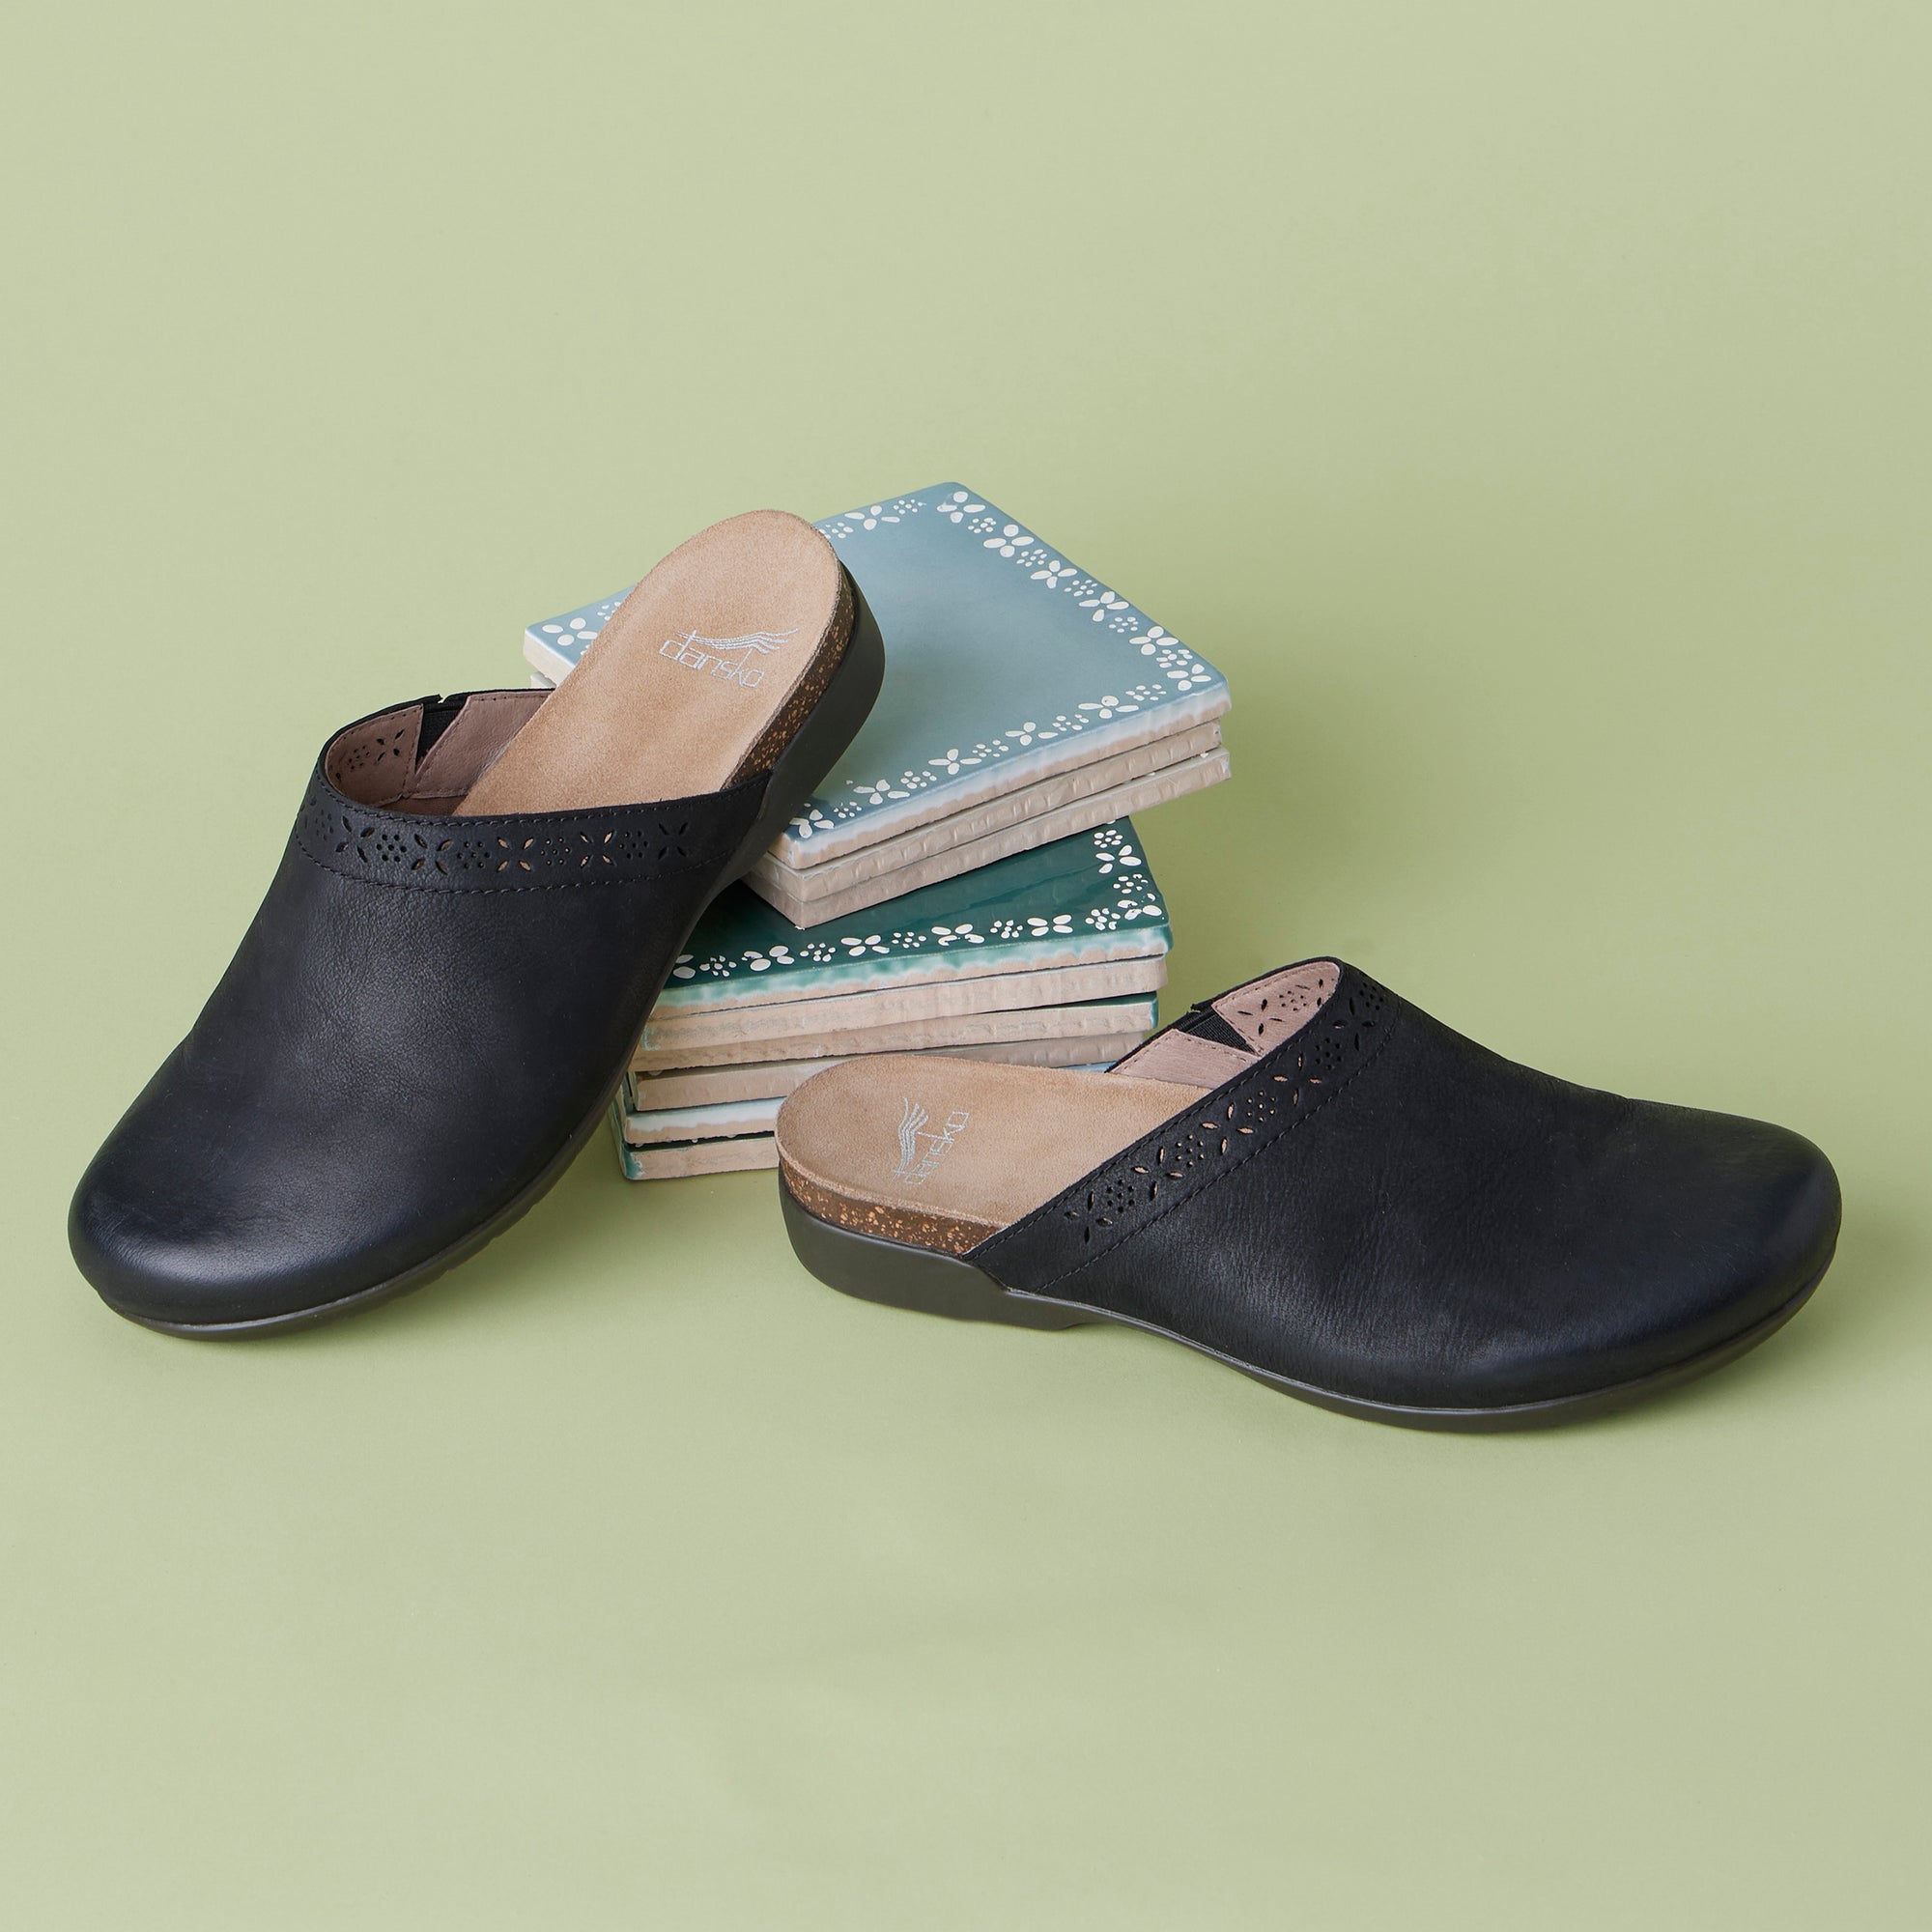 Black leather slip-on mule shown with printed detail that appears on the uppers.